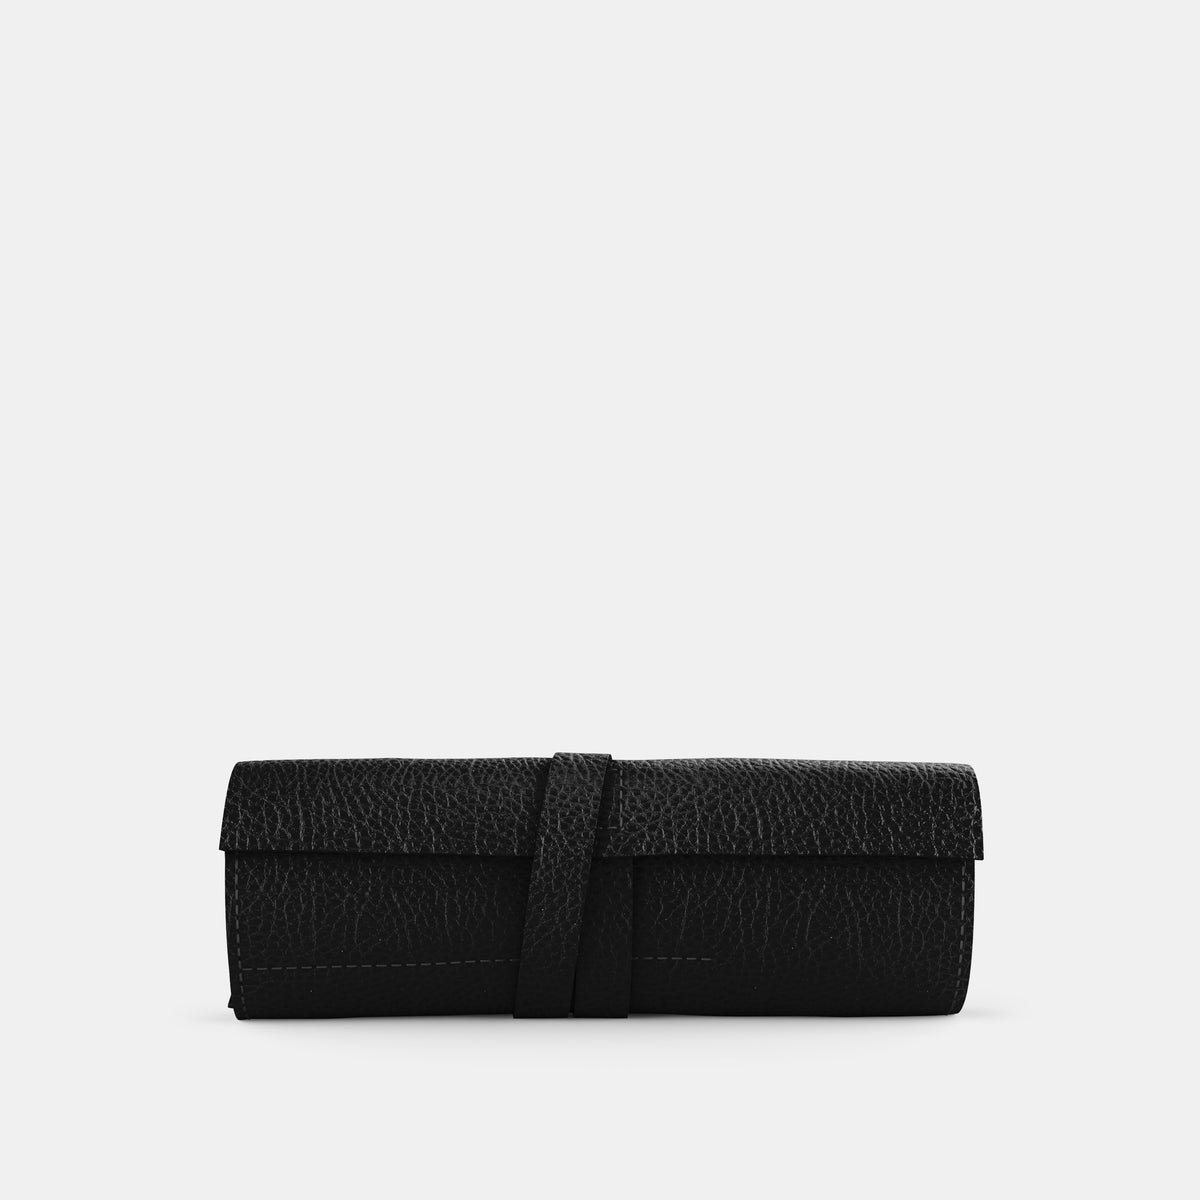 Leather Roll - Black and Black - RYAN London